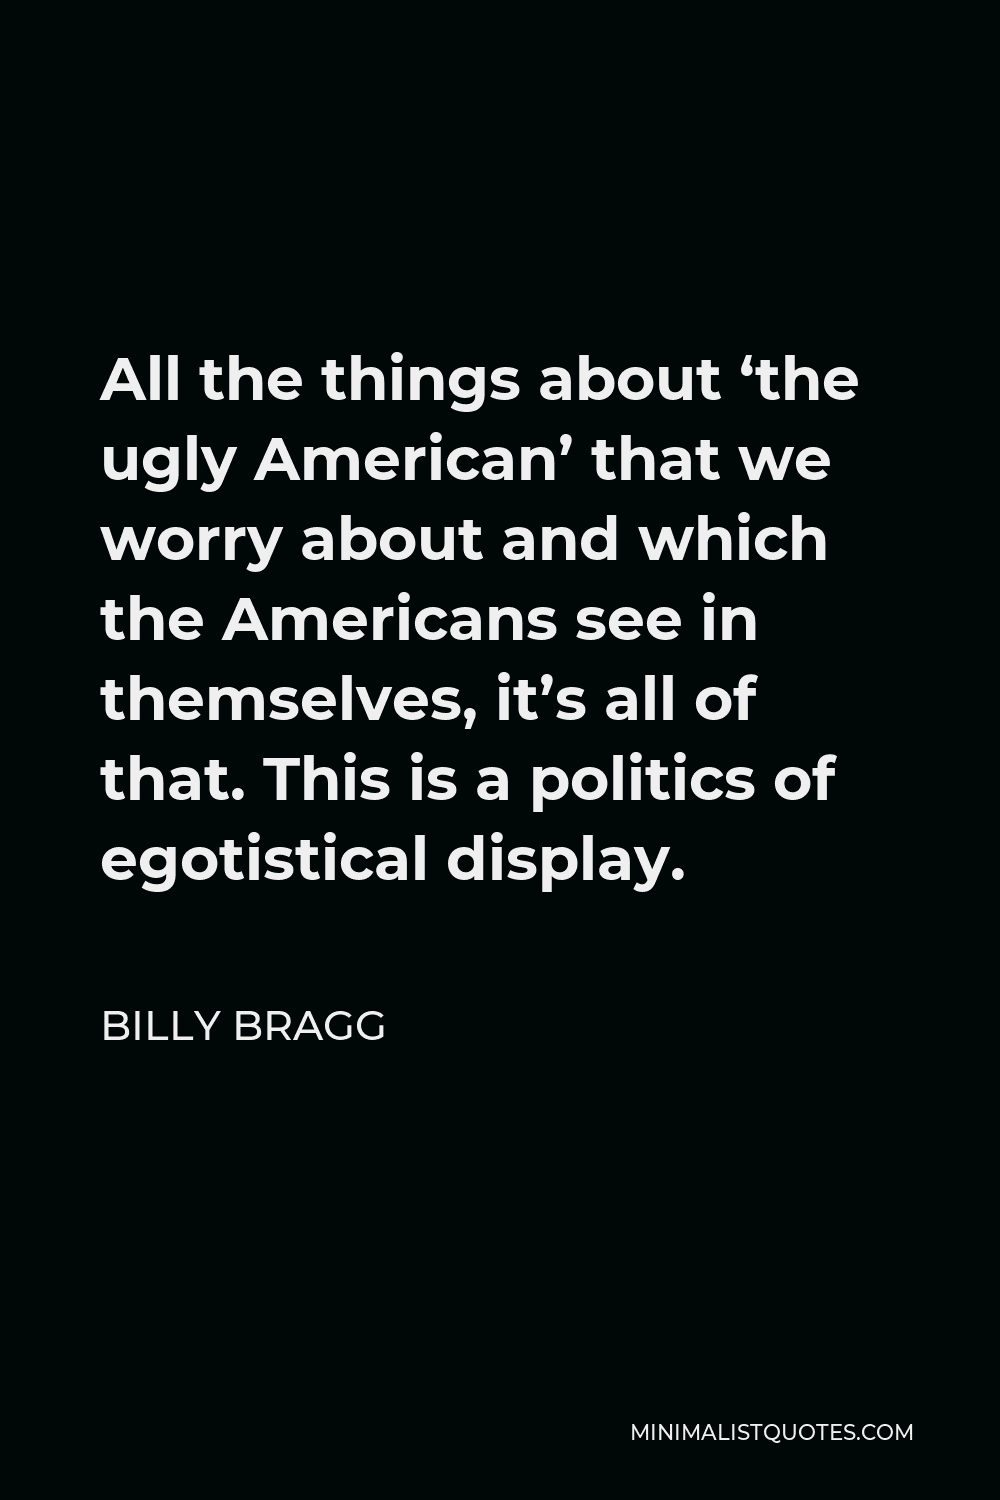 Billy Bragg Quote - All the things about ‘the ugly American’ that we worry about and which the Americans see in themselves, it’s all of that. This is a politics of egotistical display.